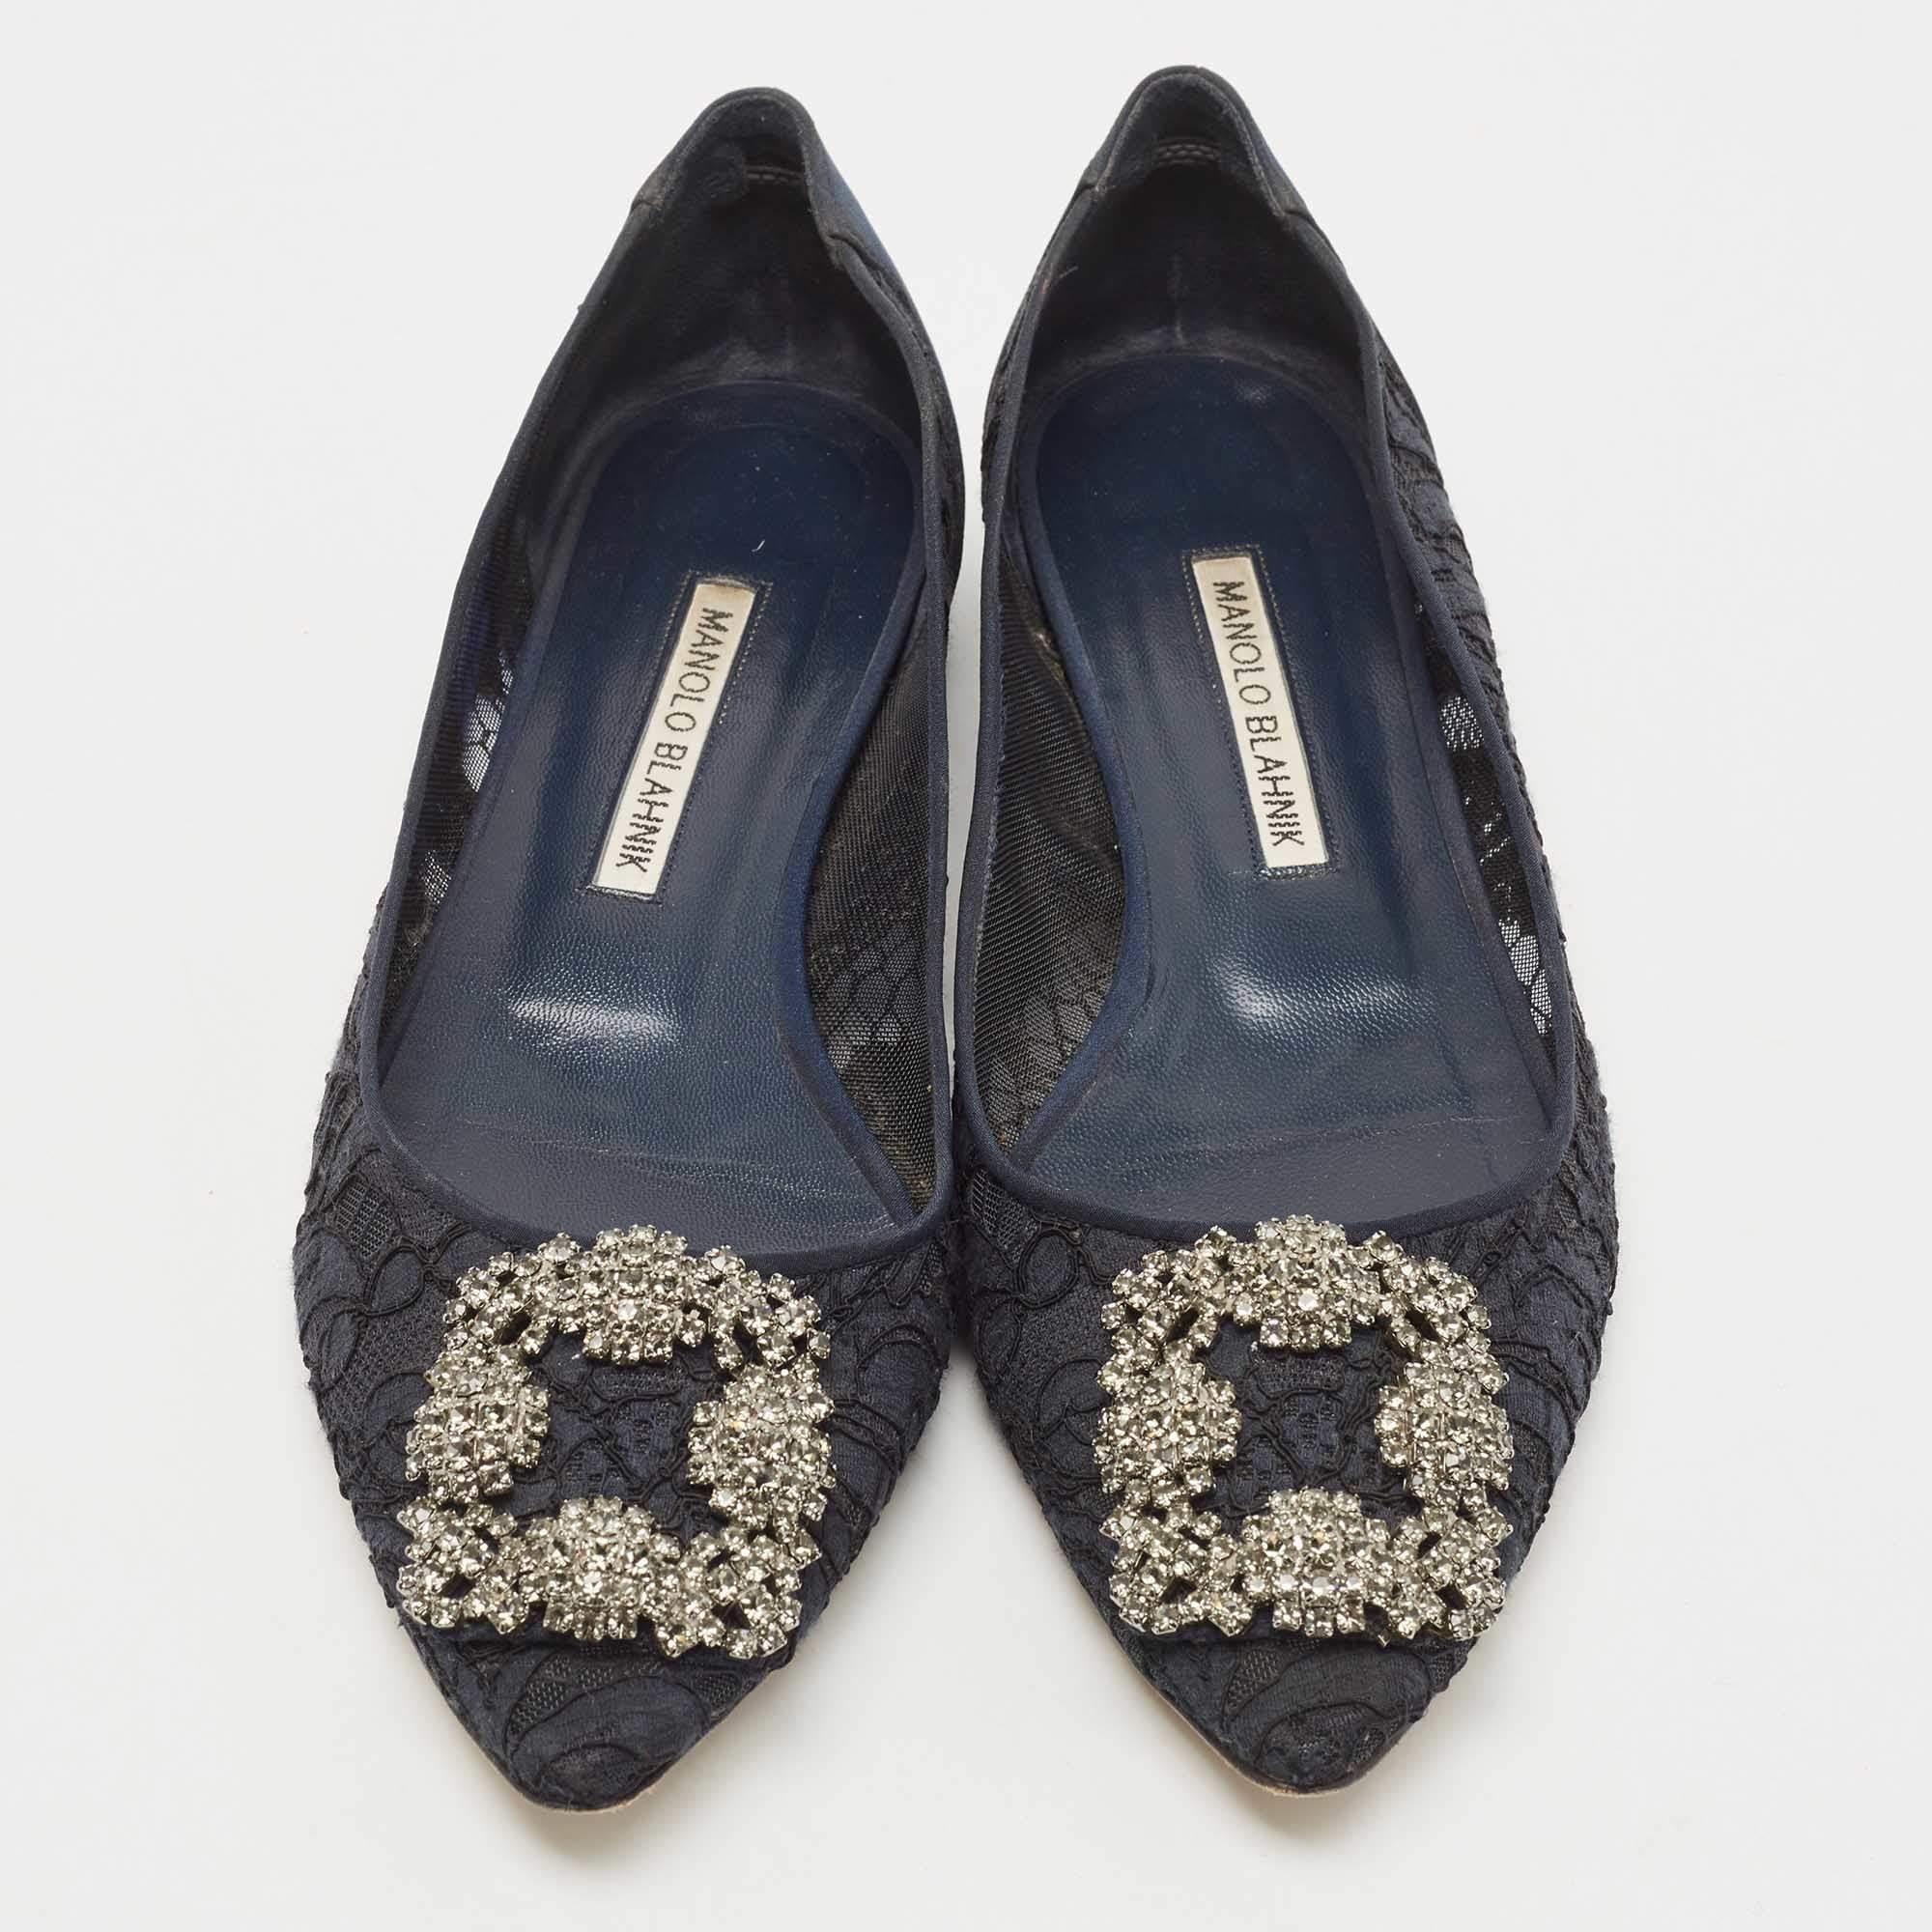 Complete your look by adding these Manolo Blahnik ballet flats to your lovely wardrobe. They are crafted skilfully to grant the perfect fit and style.

Includes: Original Dustbag
